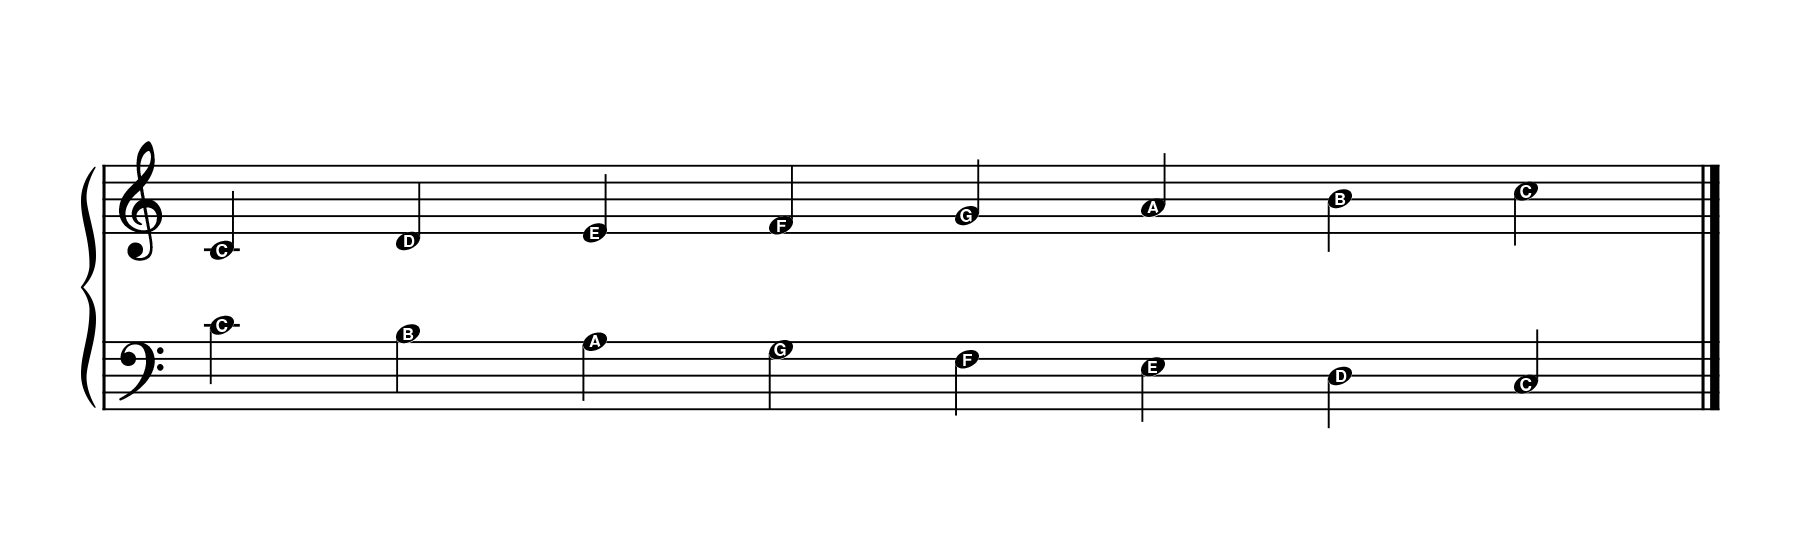 The grand staff with the names and positions of notes in the C major scale.